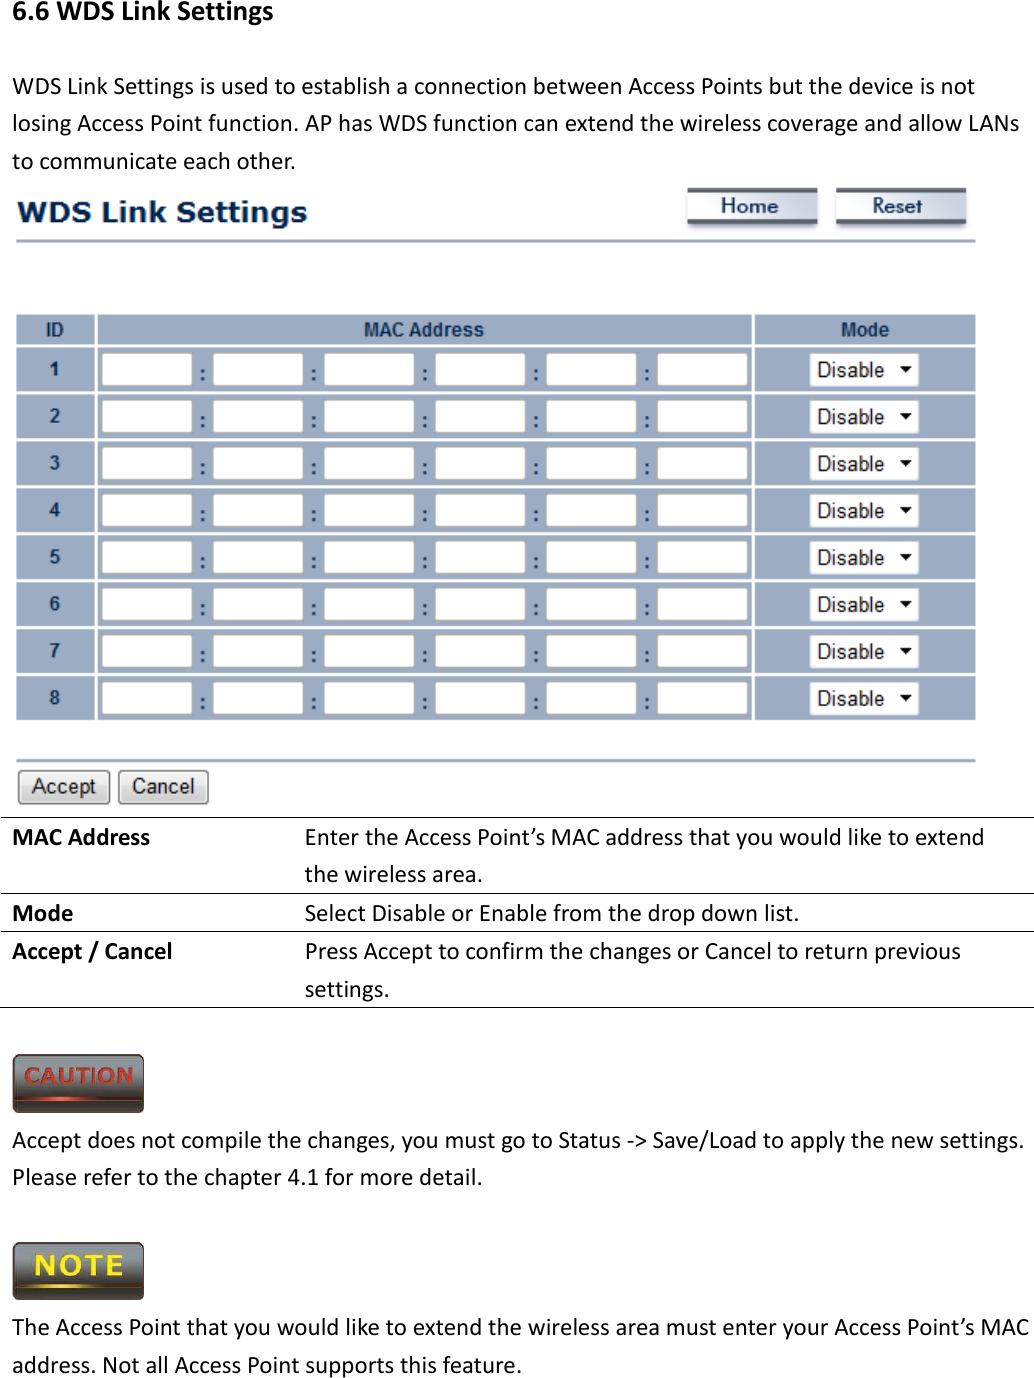 6.6 WDS Link Settings WDS Link Settings is used to establish a connection between Access Points but the device is not losing Access Point function. AP has WDS function can extend the wireless coverage and allow LANs to communicate each other.  MAC Address  Enter the Access Point’s MAC address that you would like to extend the wireless area. Mode  Select Disable or Enable from the drop down list. Accept / Cancel  Press Accept to confirm the changes or Cancel to return previous settings.   Accept does not compile the changes, you must go to Status -&gt; Save/Load to apply the new settings. Please refer to the chapter 4.1 for more detail.     The Access Point that you would like to extend the wireless area must enter your Access Point’s MAC address. Not all Access Point supports this feature.  